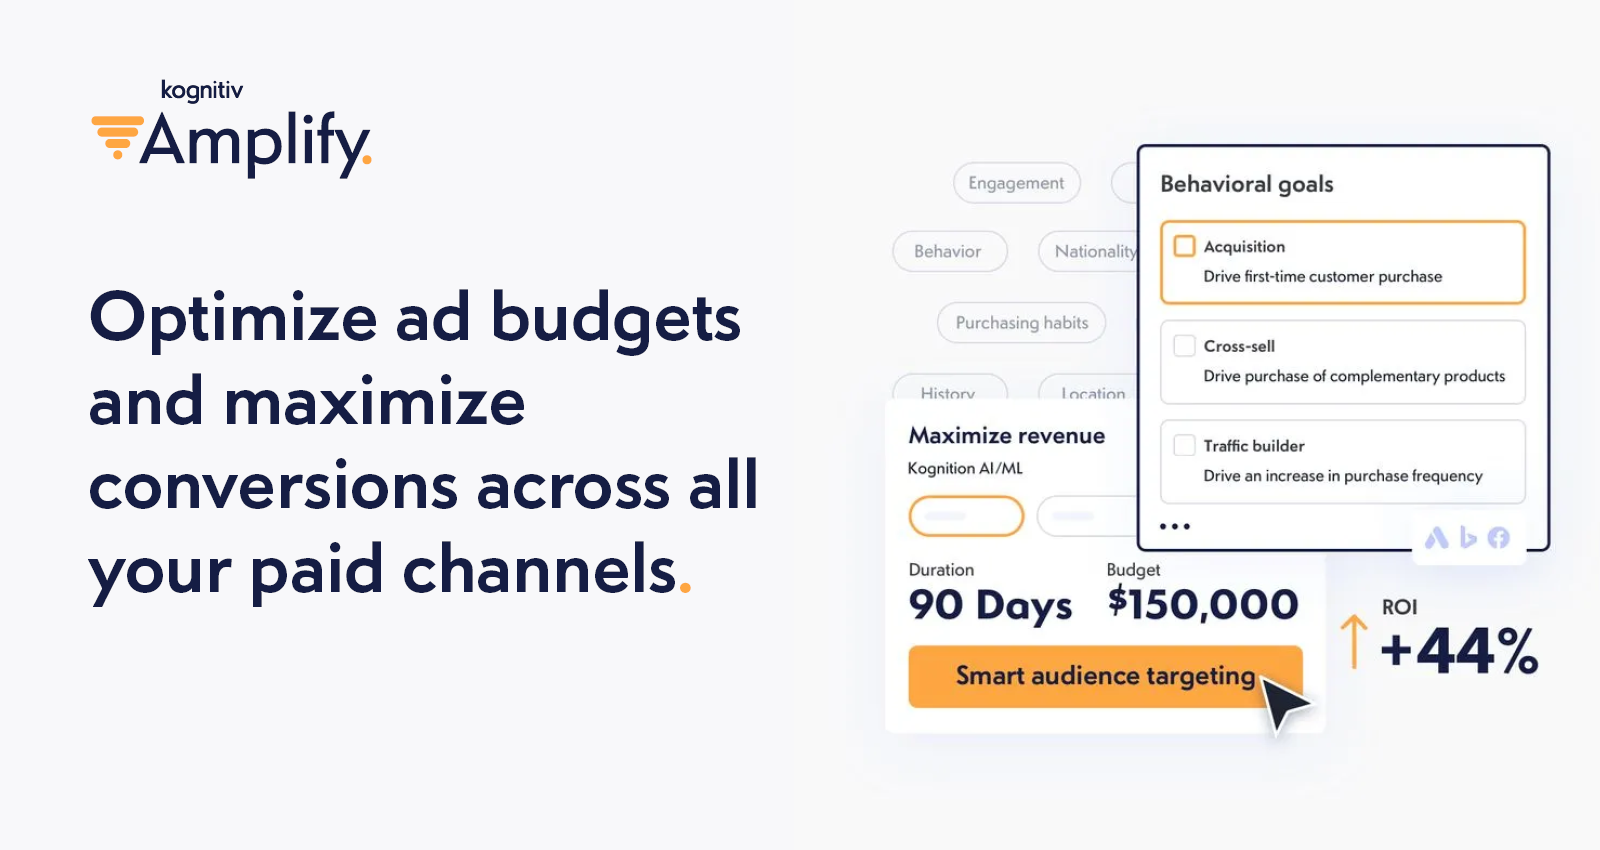 Optimize ad budgets and maximize conversions across all your paid channels.